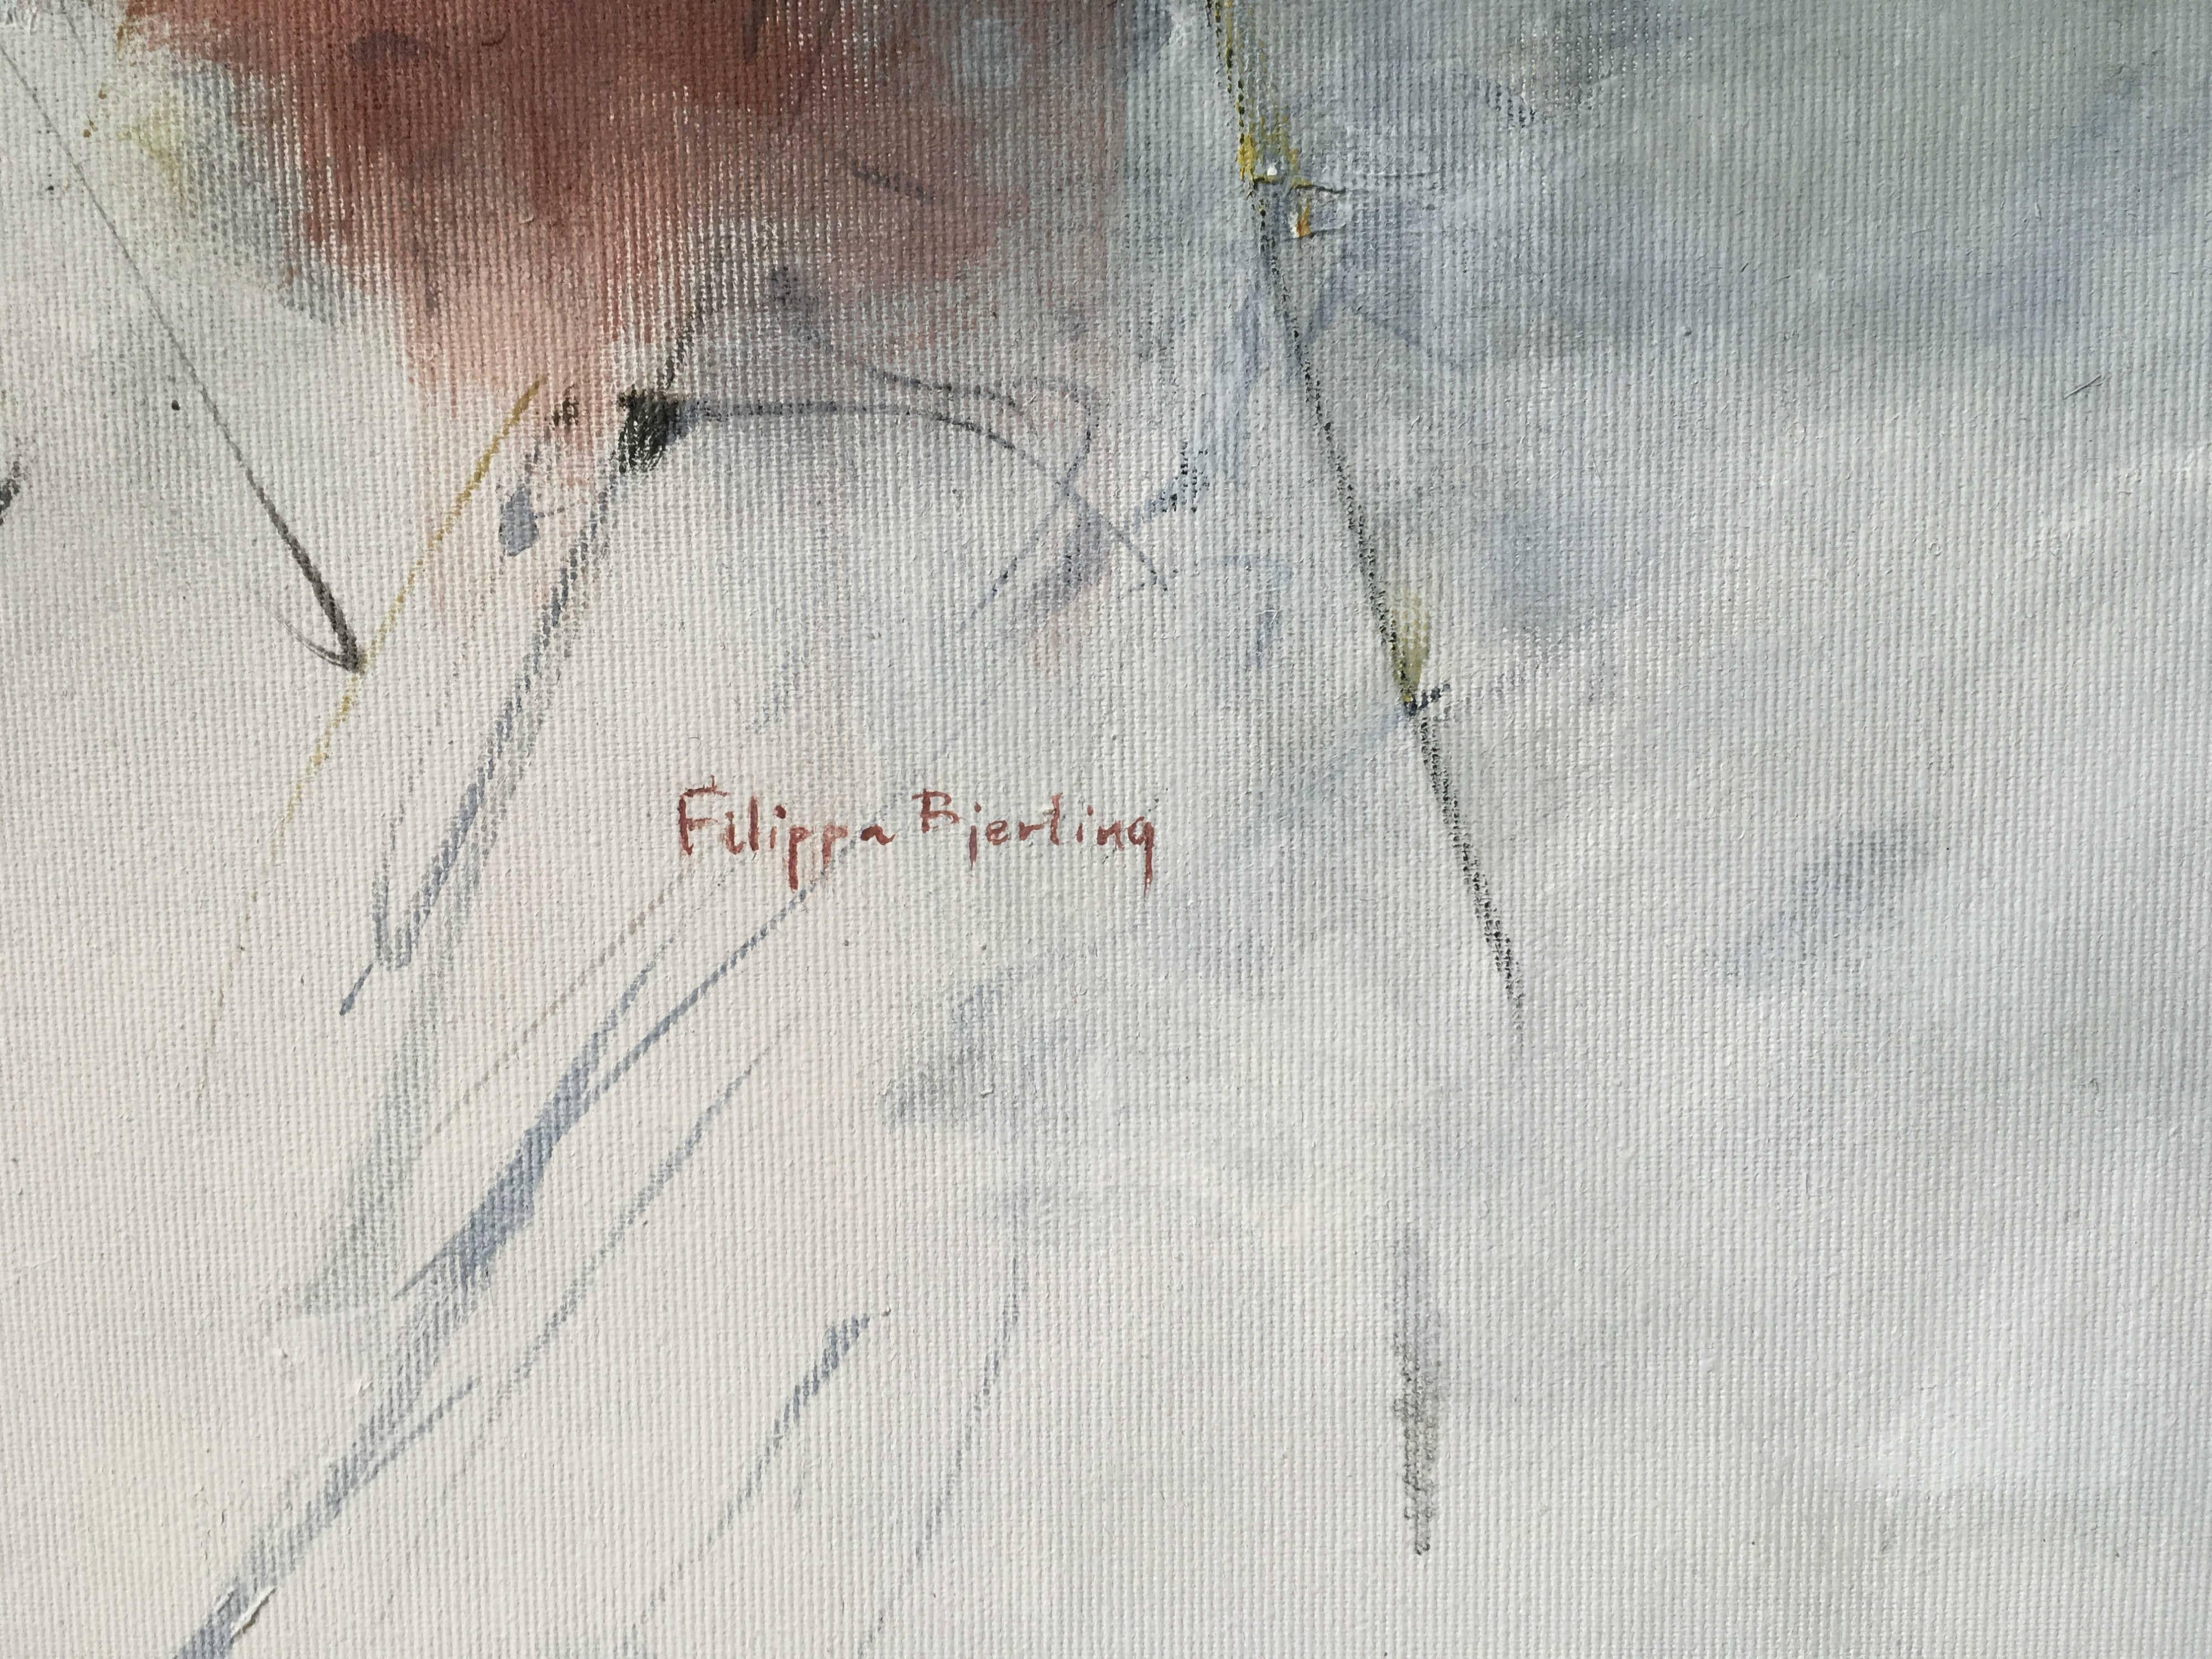 Andy's nest - Contemporary Painting by Filippa Bjerling